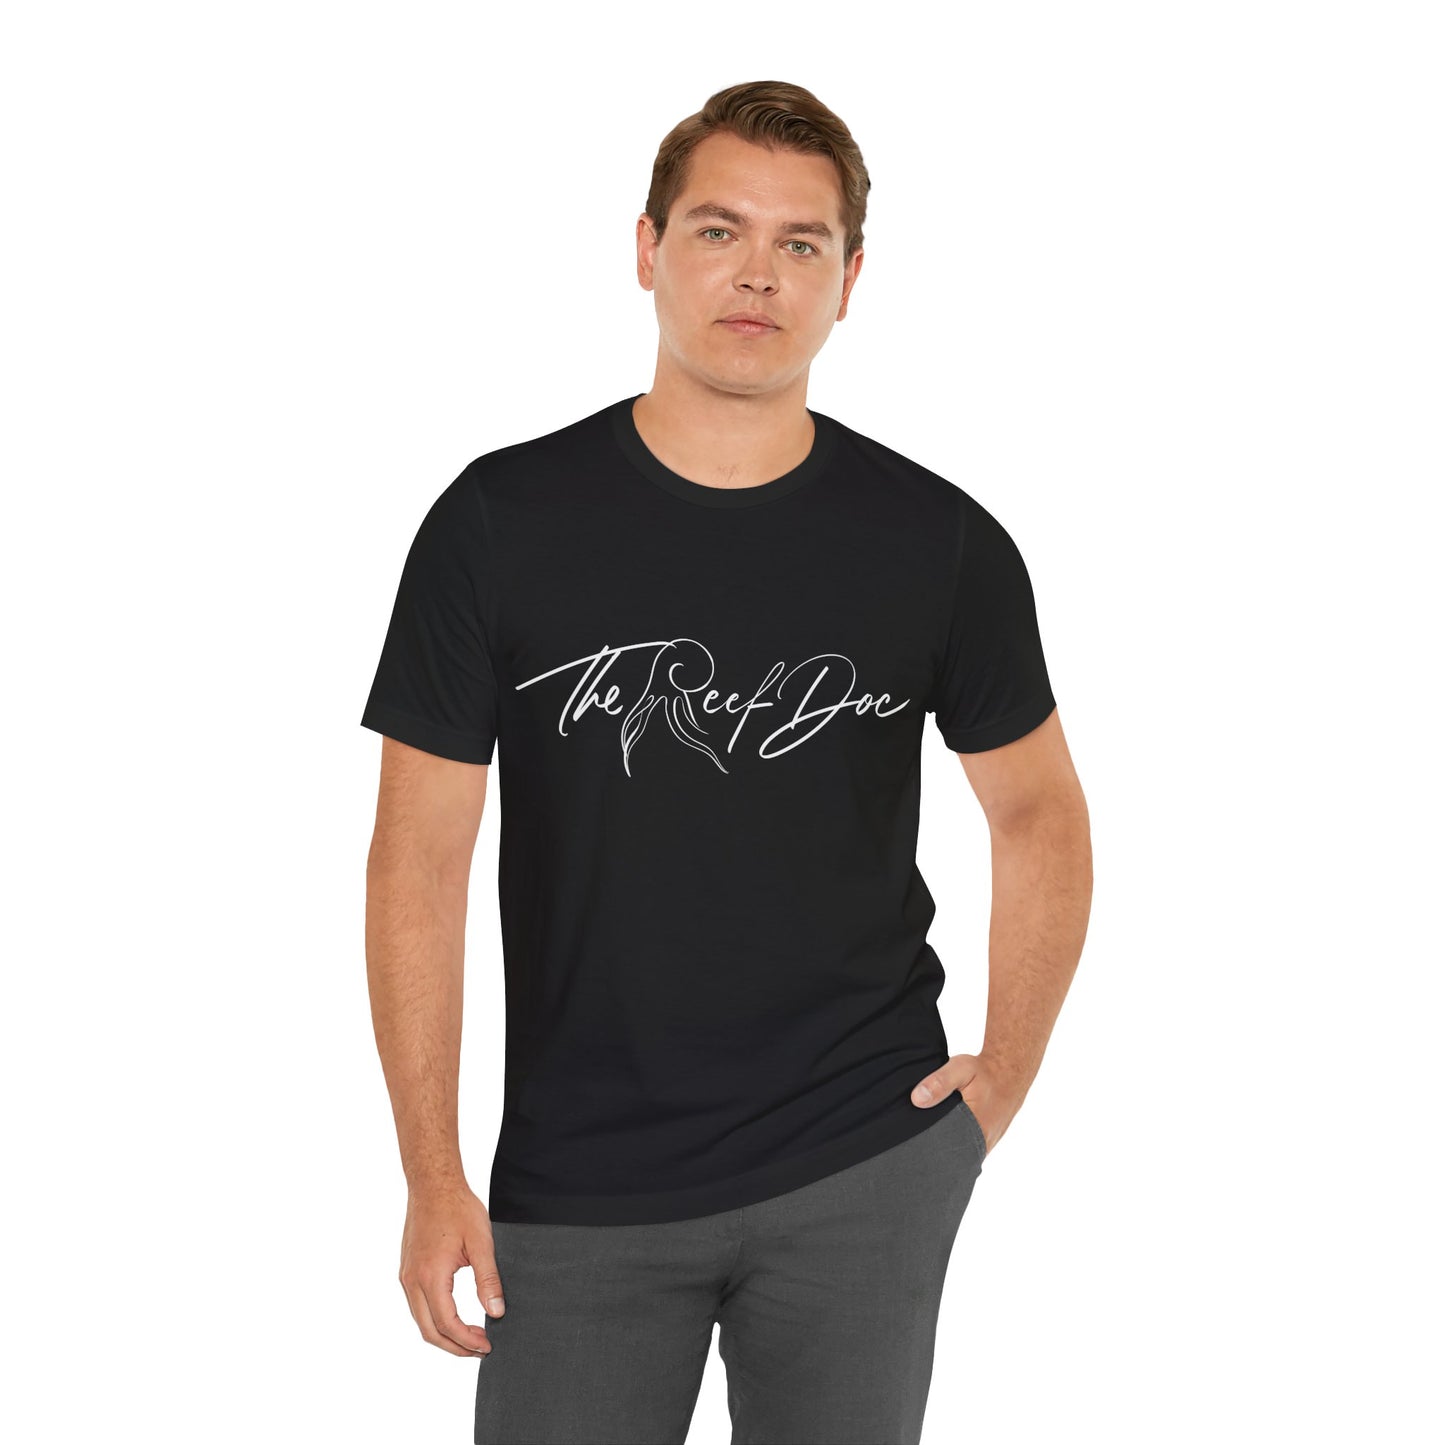 The Reef Doc T-Shirt